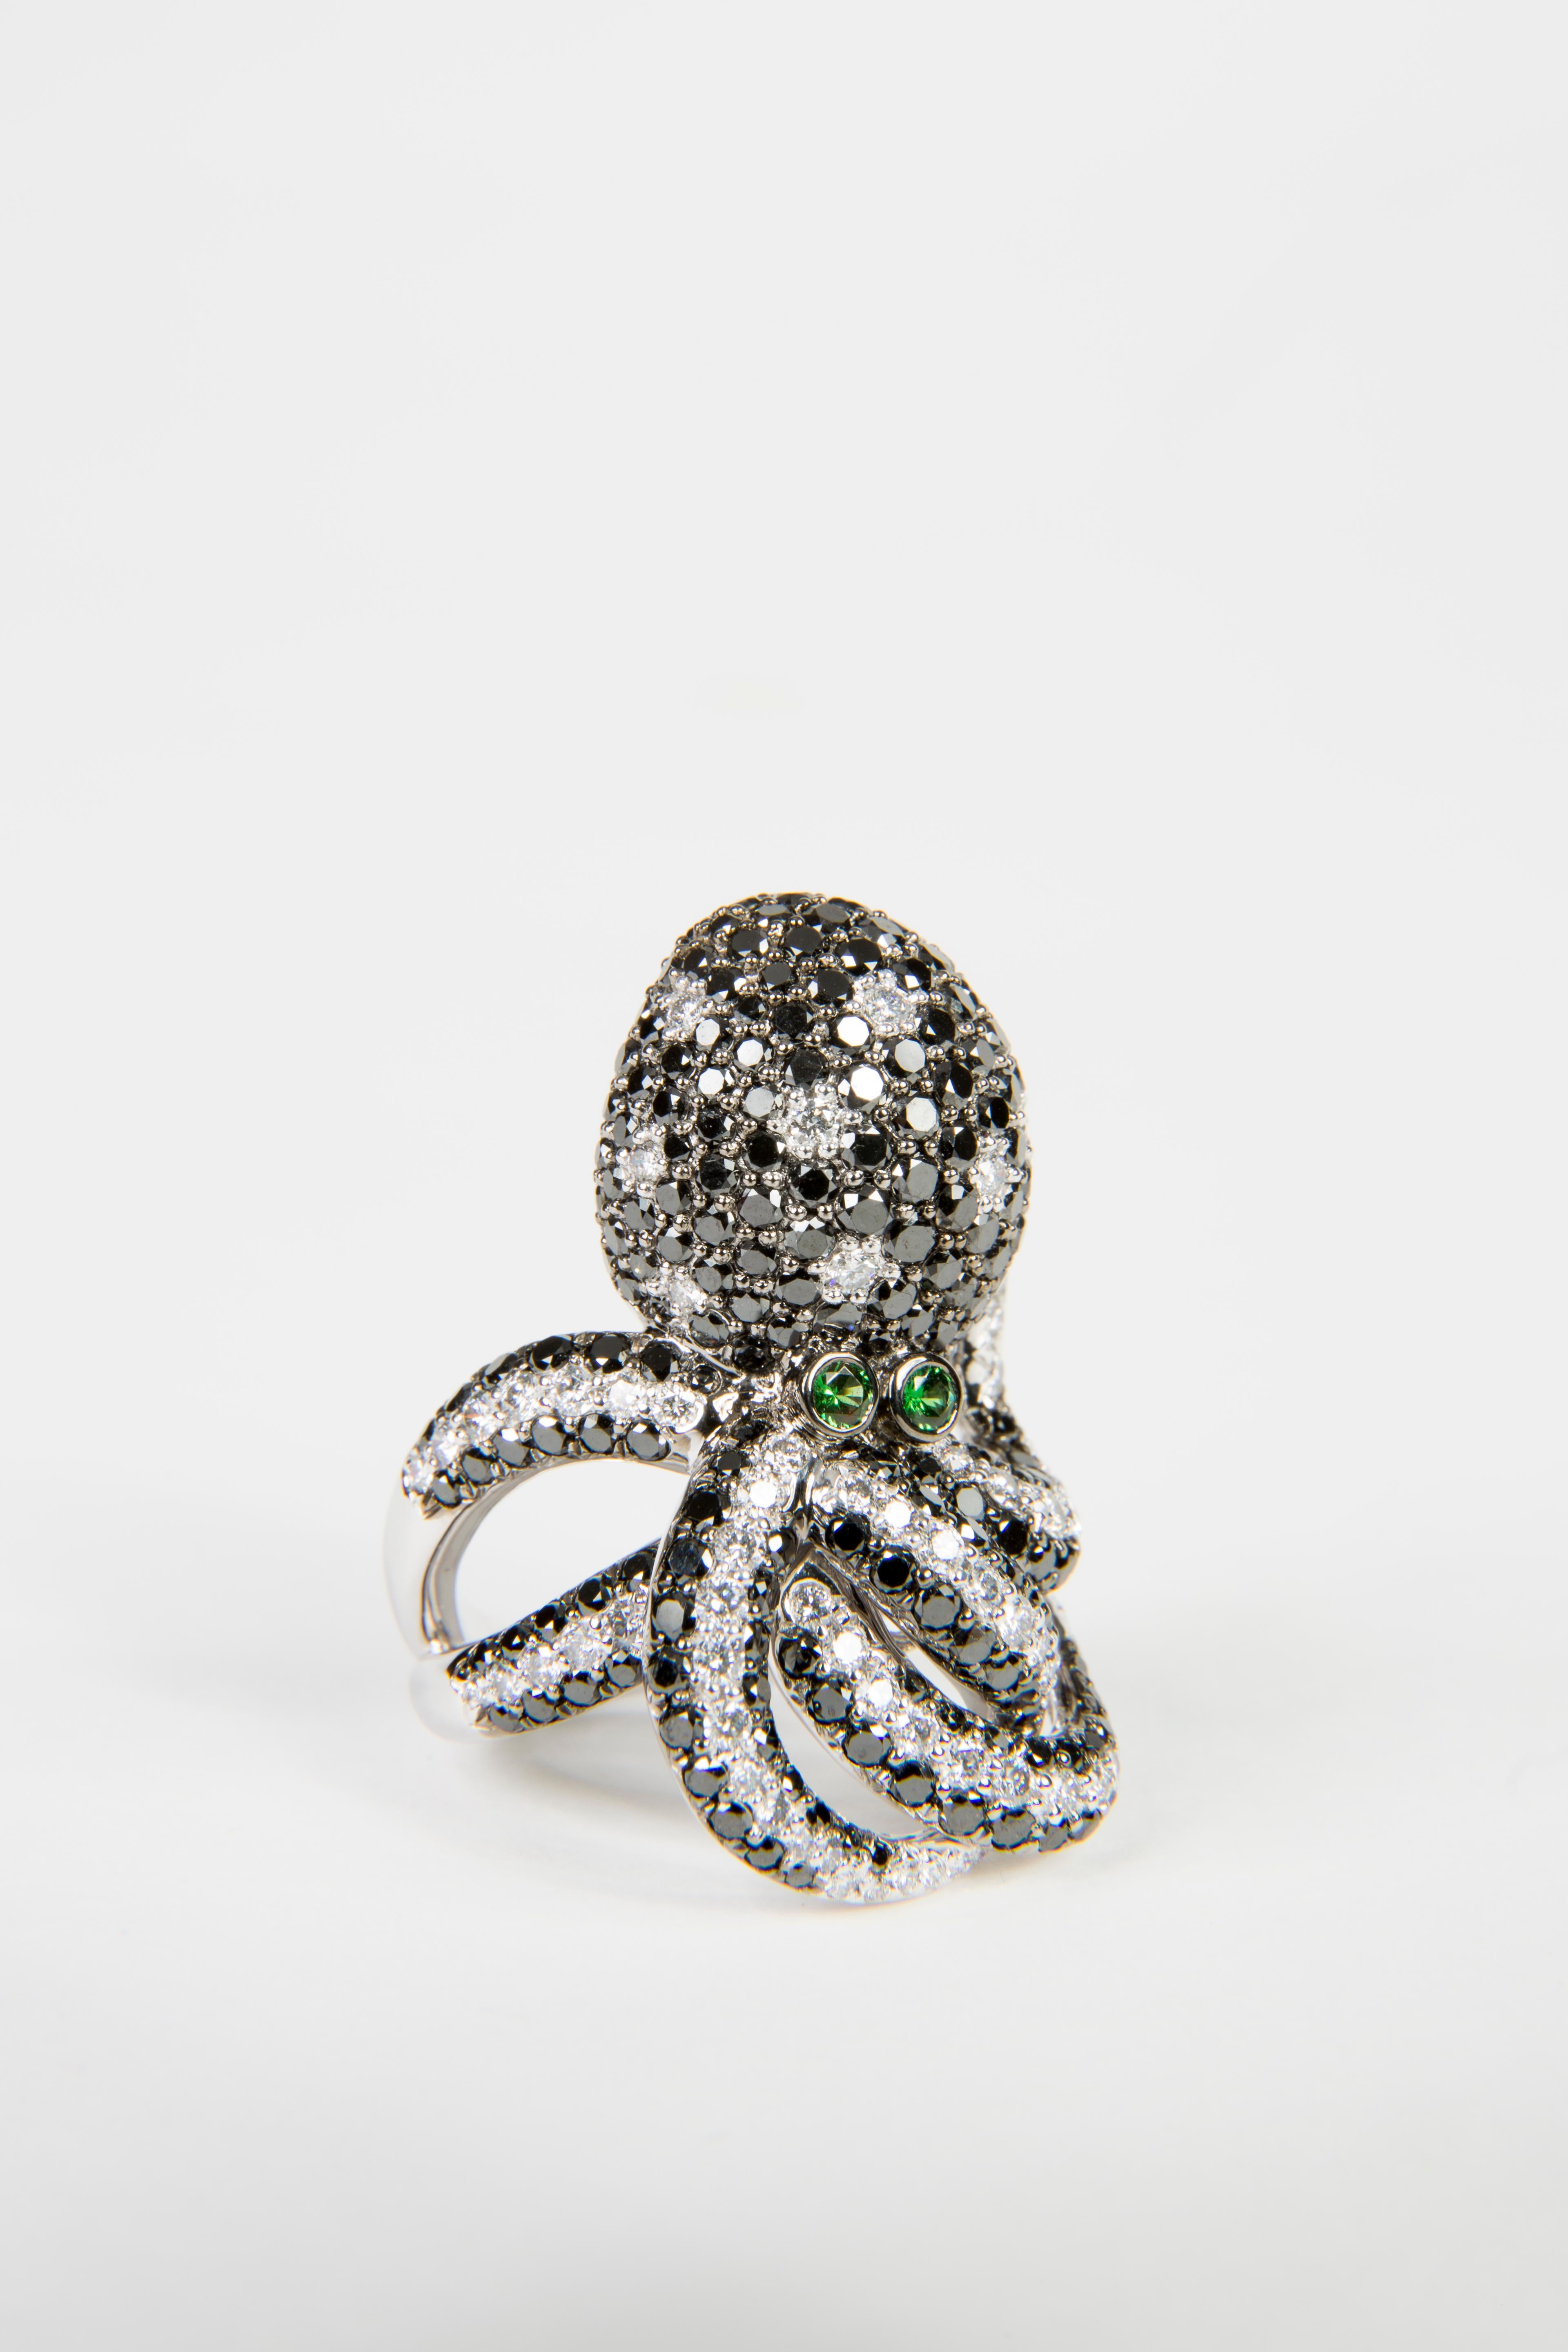 Contemporary 5.63 Carat Diamond and Tsavorite Octopus Shaped Cocktail Ring in 18 Karat Gold For Sale